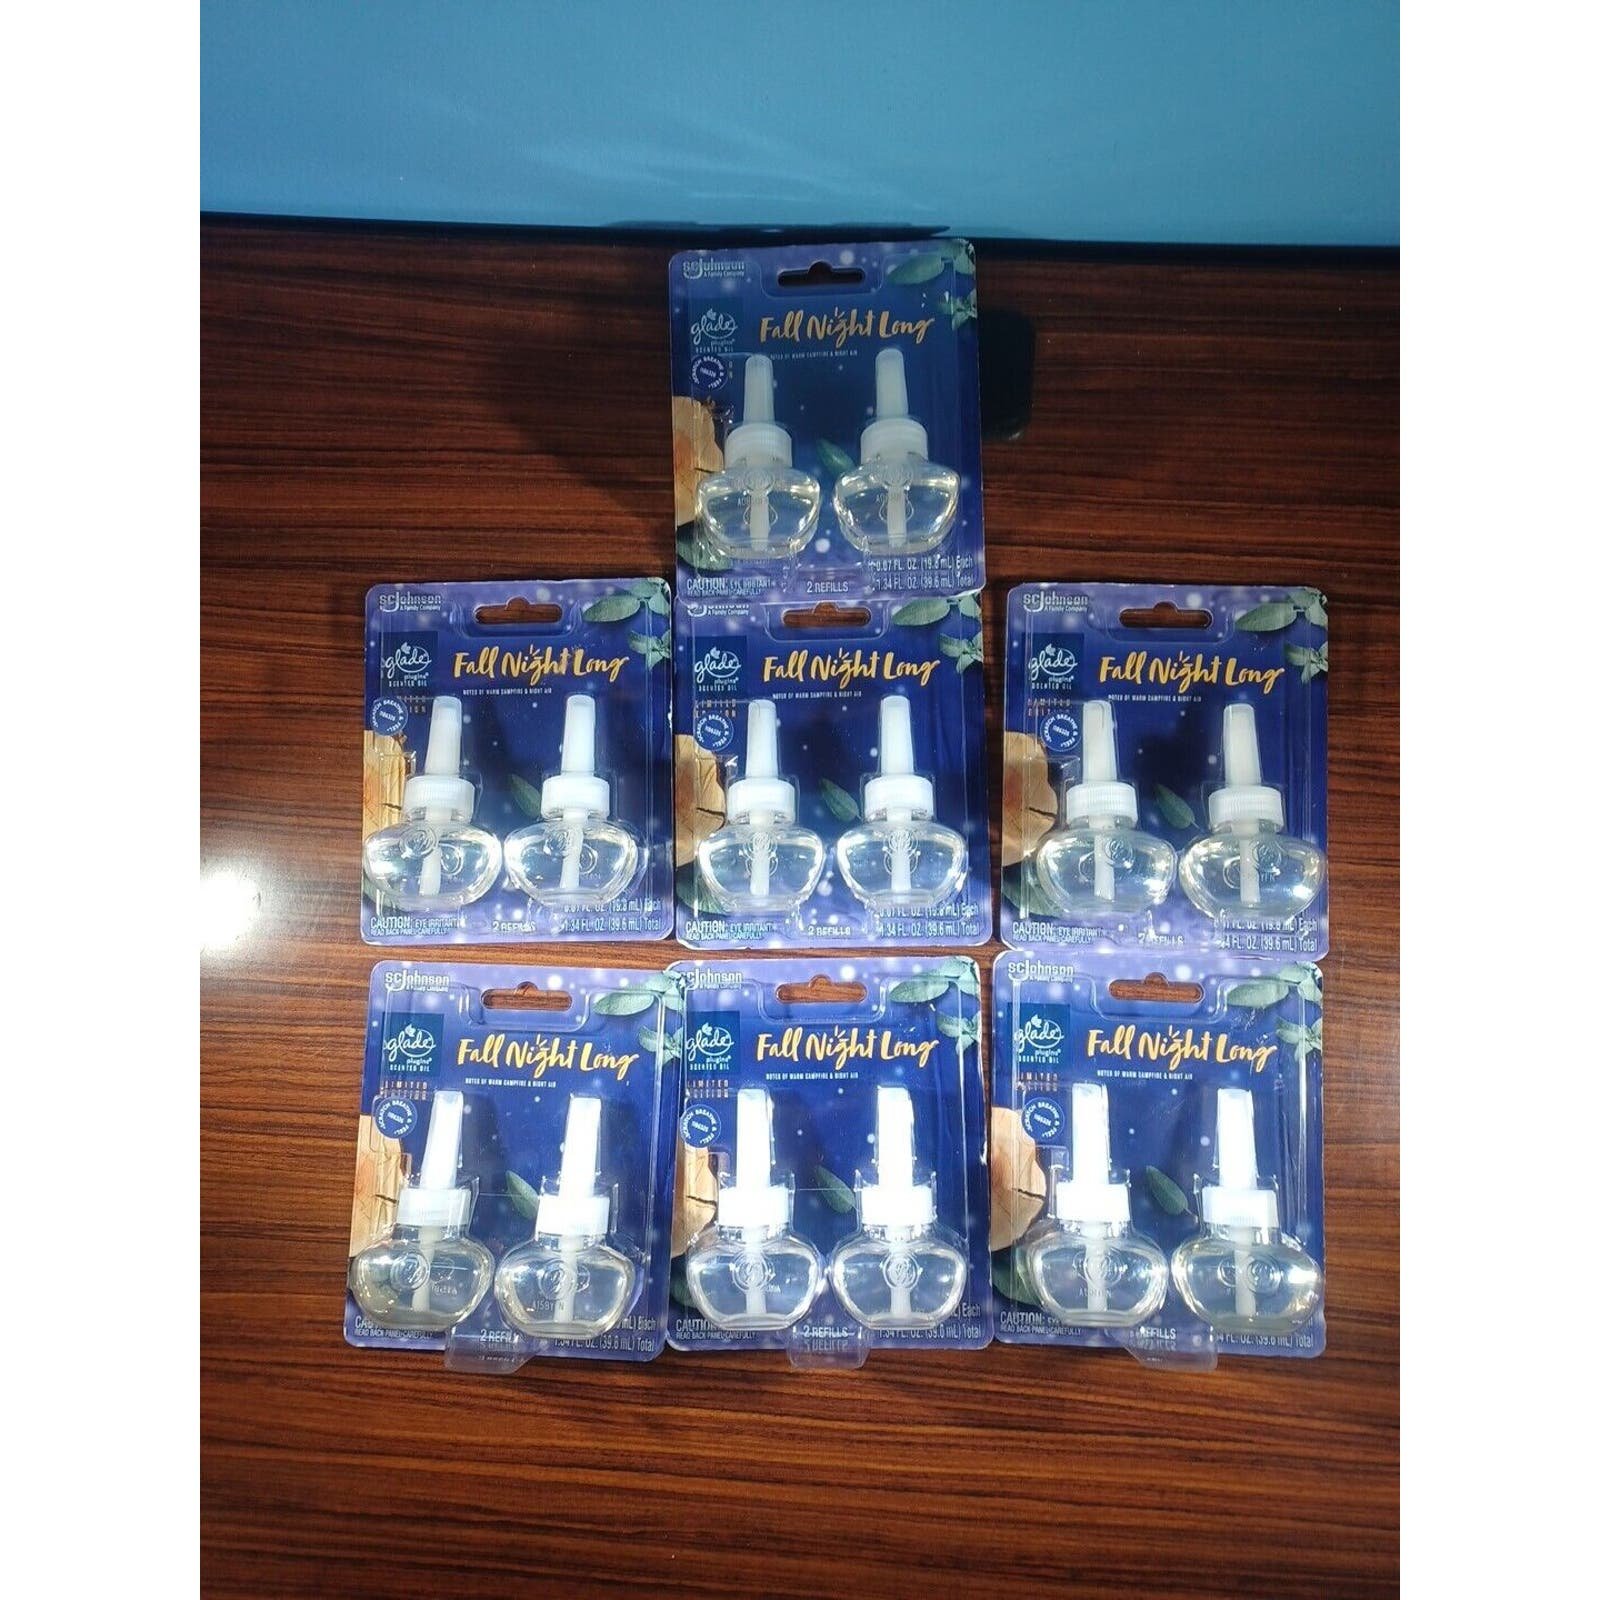 14 Glade PlugIns Fall Night Long Scented Oil Air Freshe